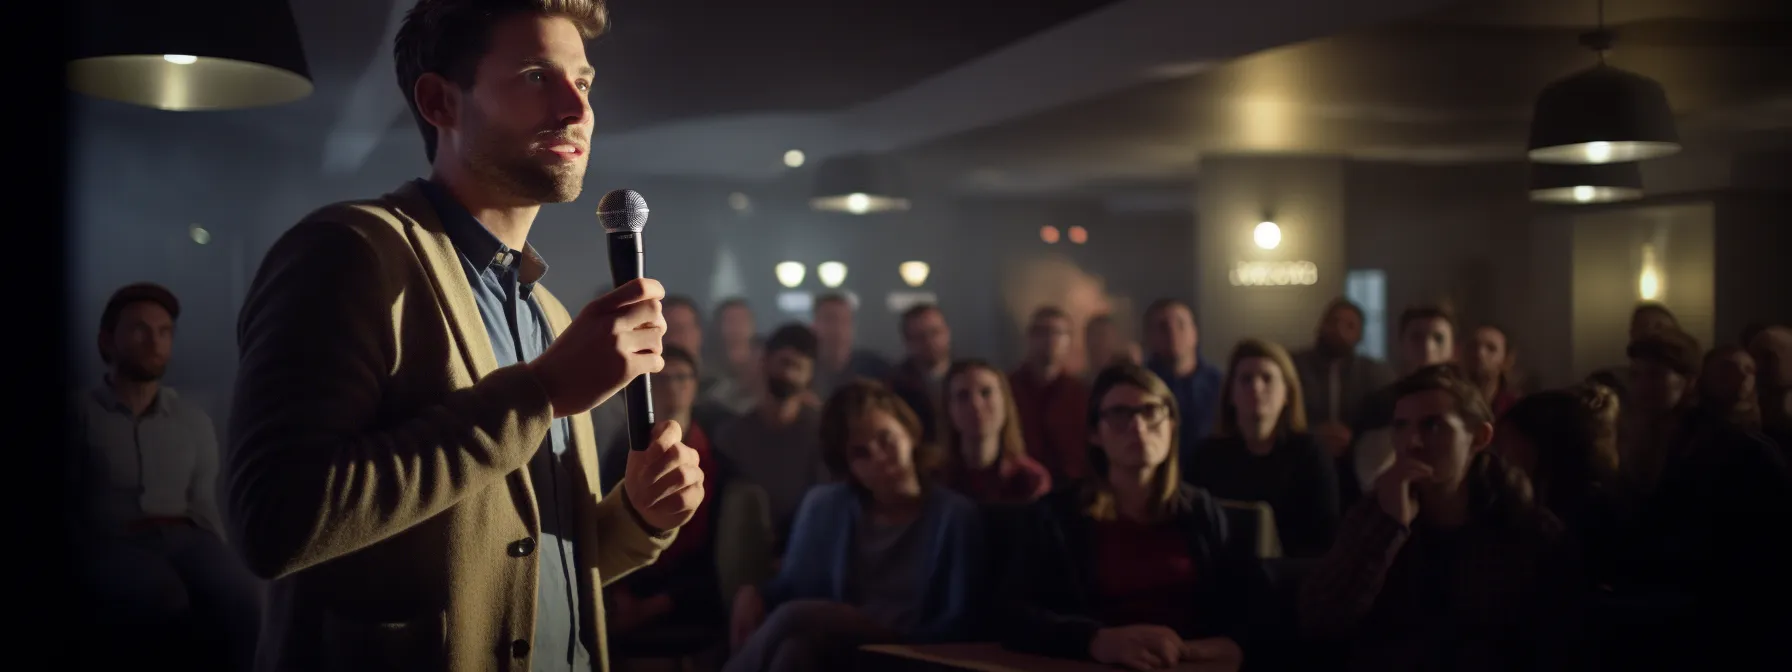 a copywriter, pen in hand, captivates an audience with a powerful storytelling presentation.